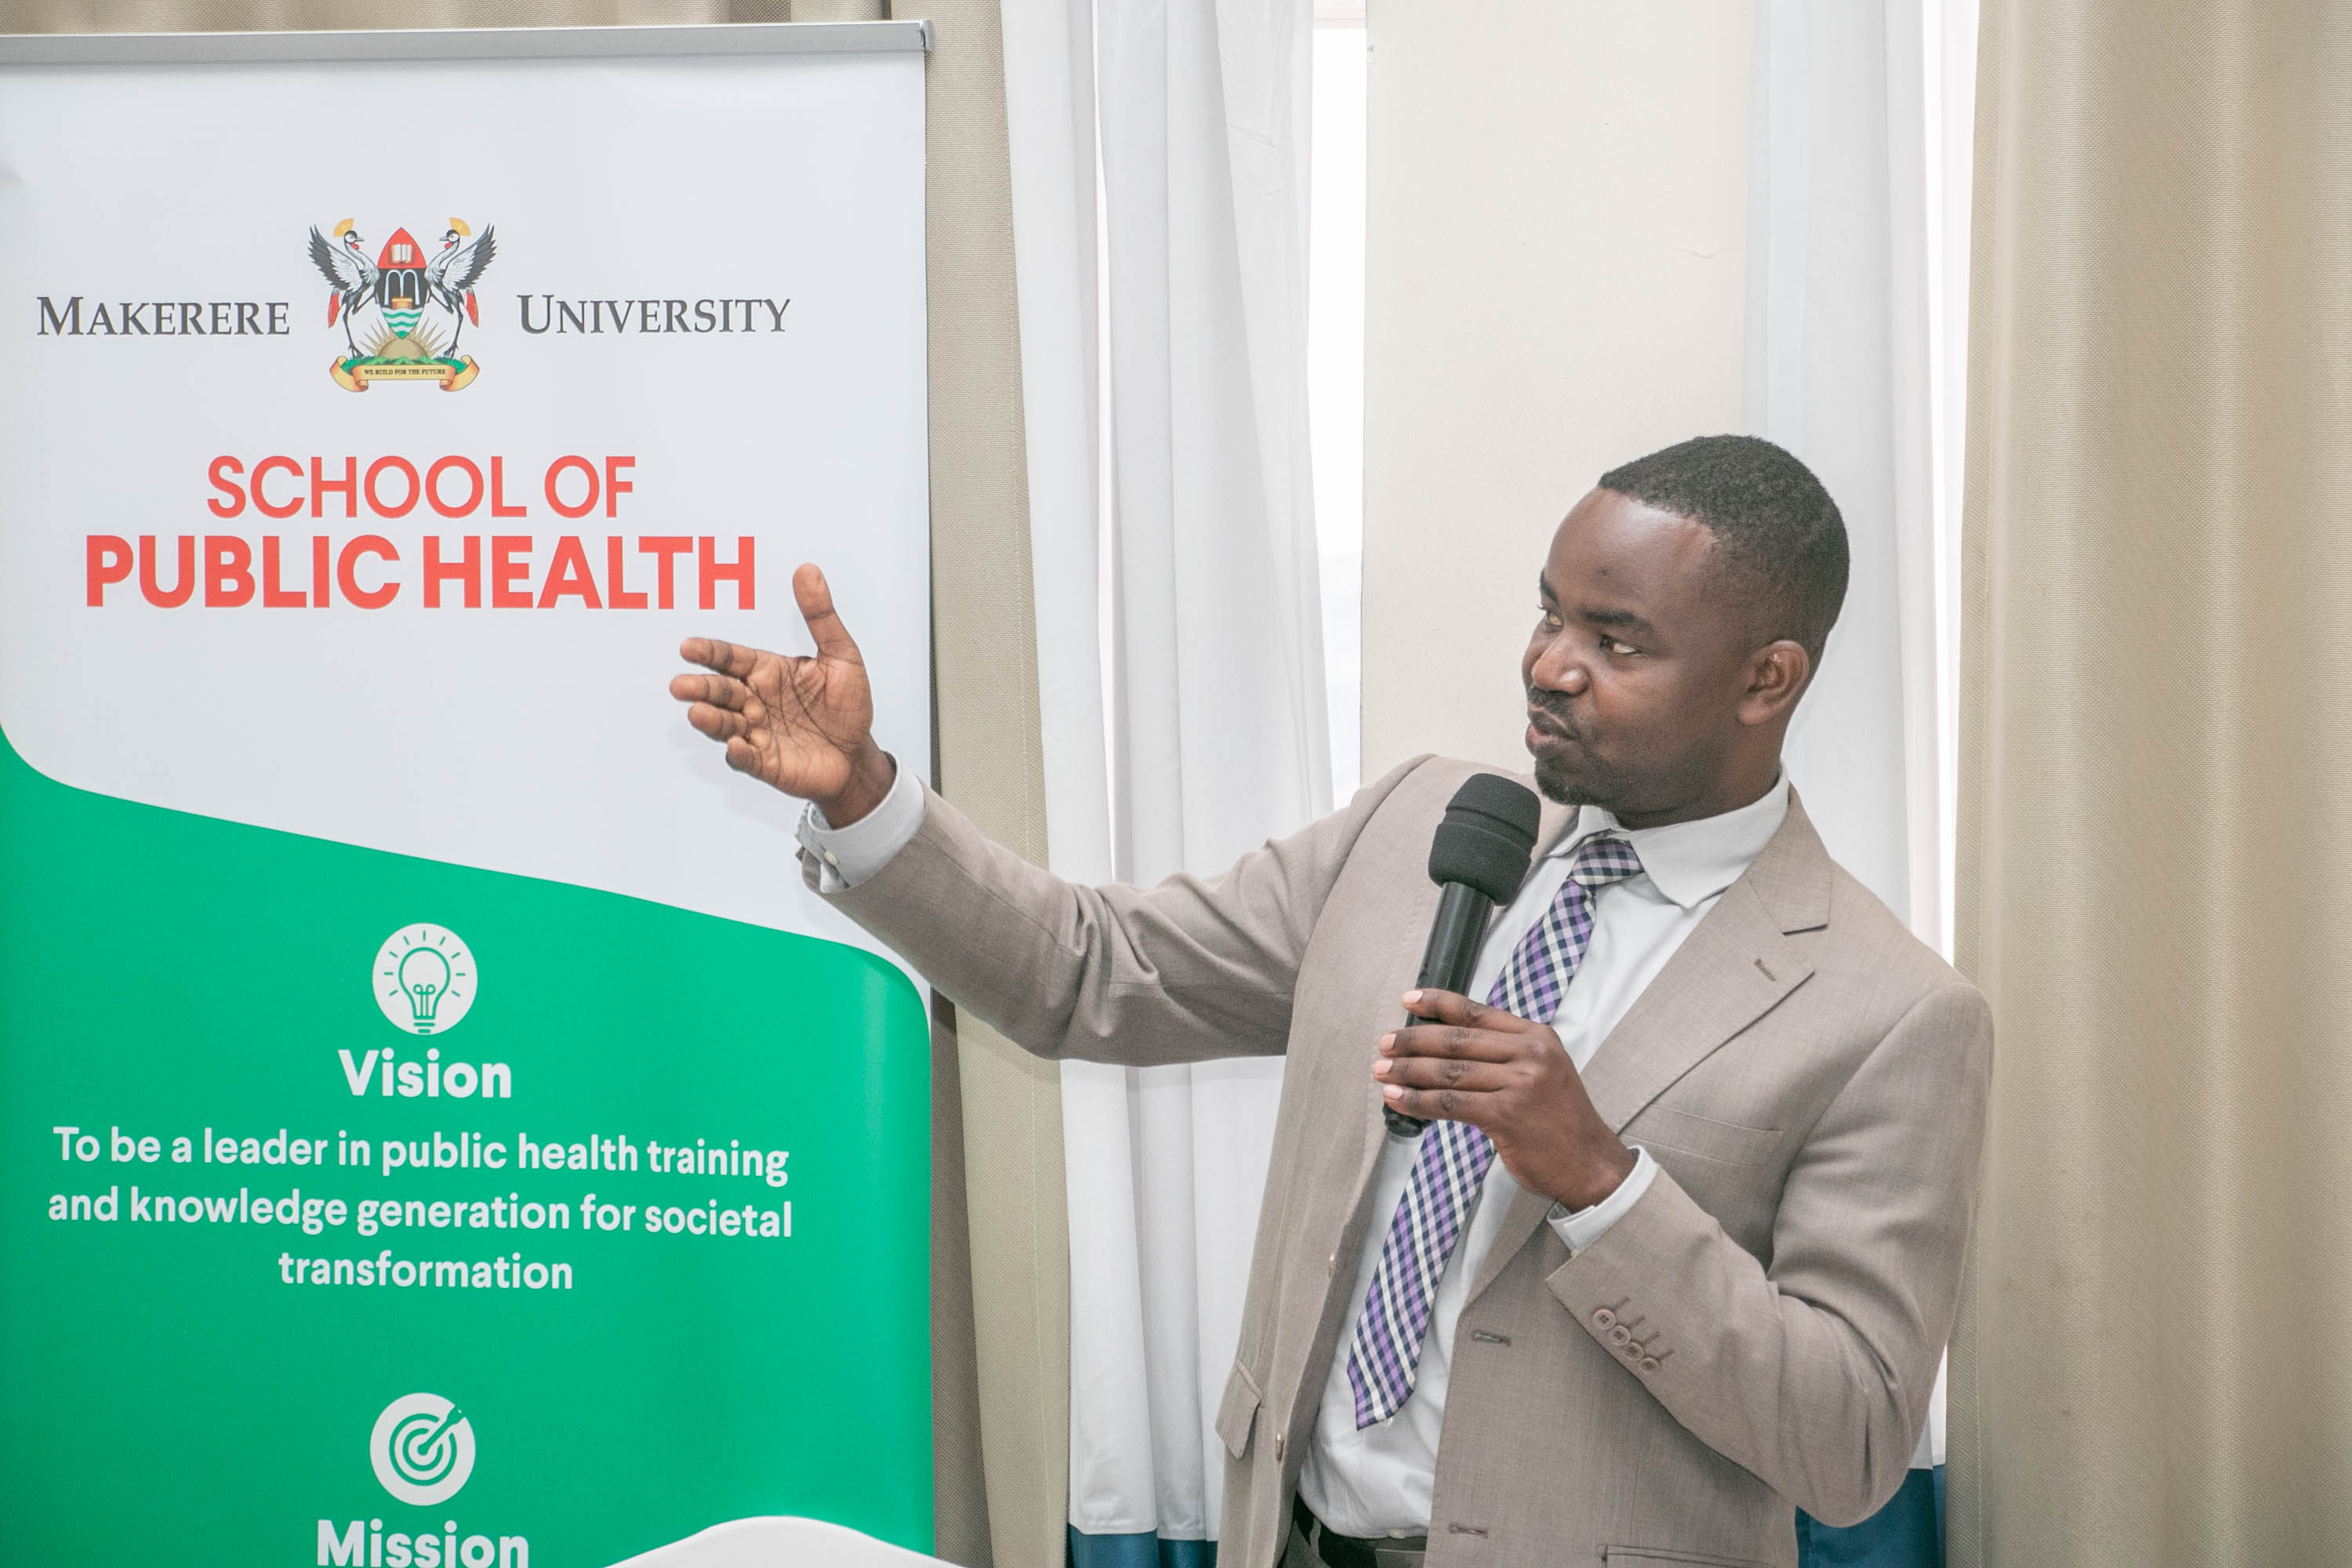 Dr. Richard Mugahi, the Assistant Commissioner for Reproductive and Infant Health Services